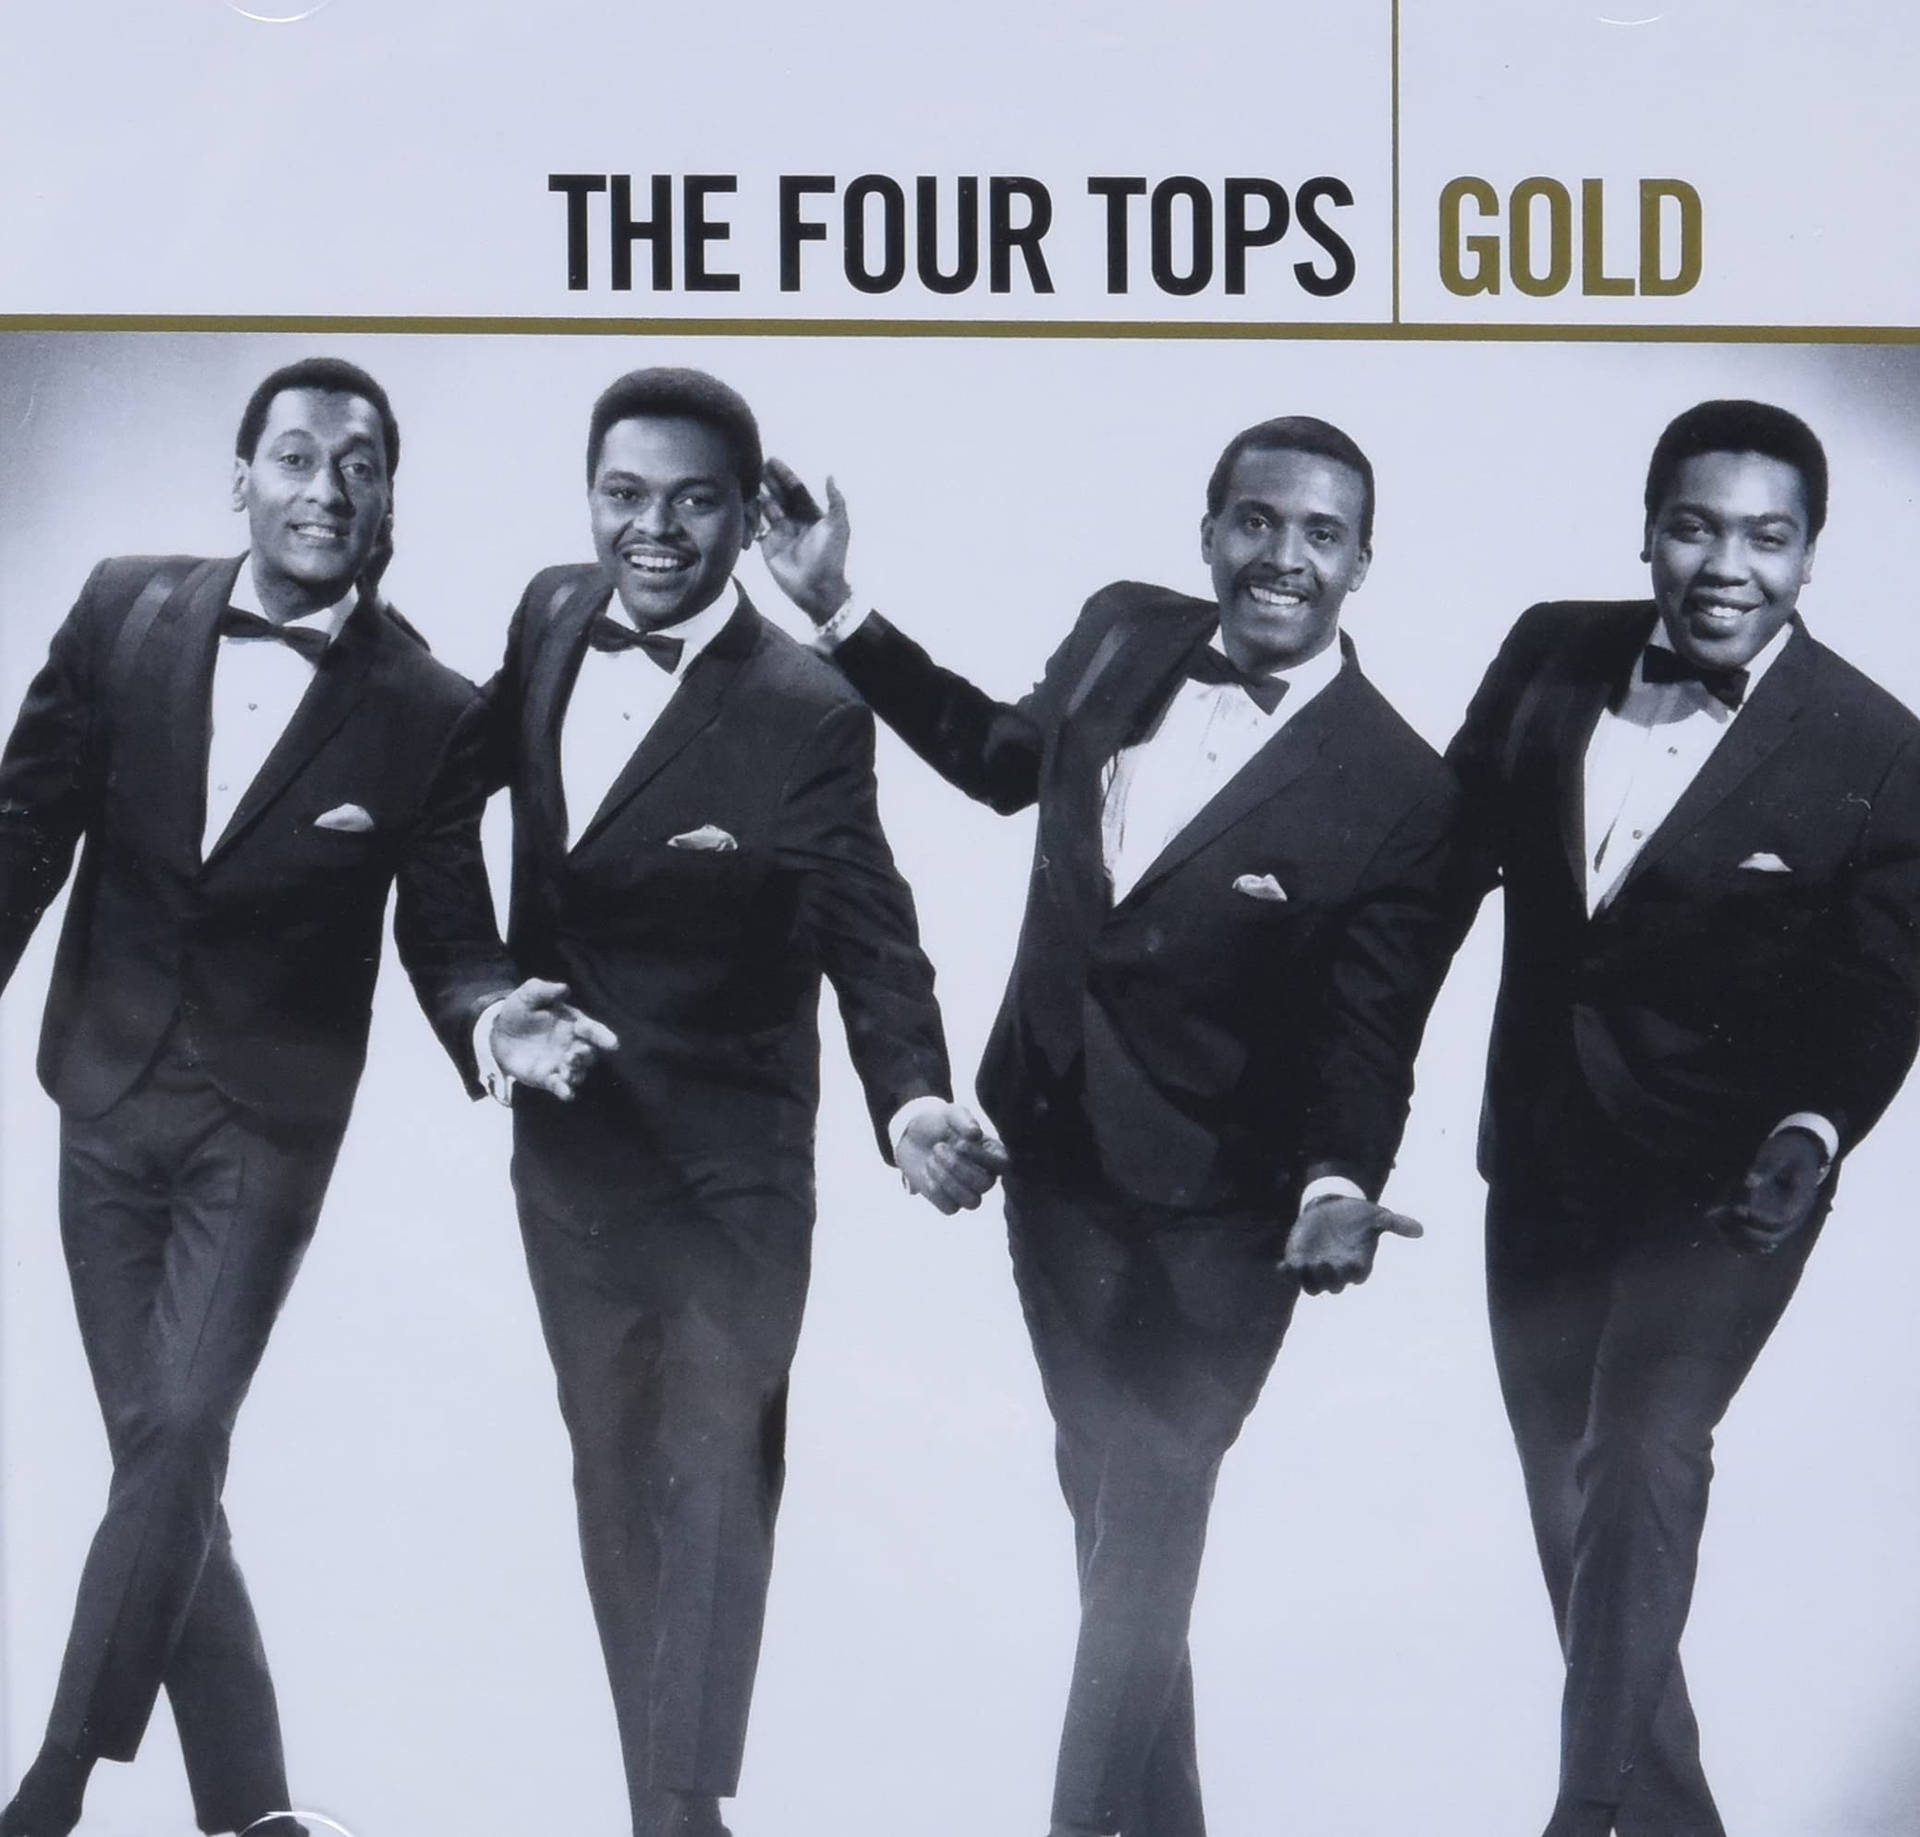 The Four Tops Gold Album CD Cover Wallpaper